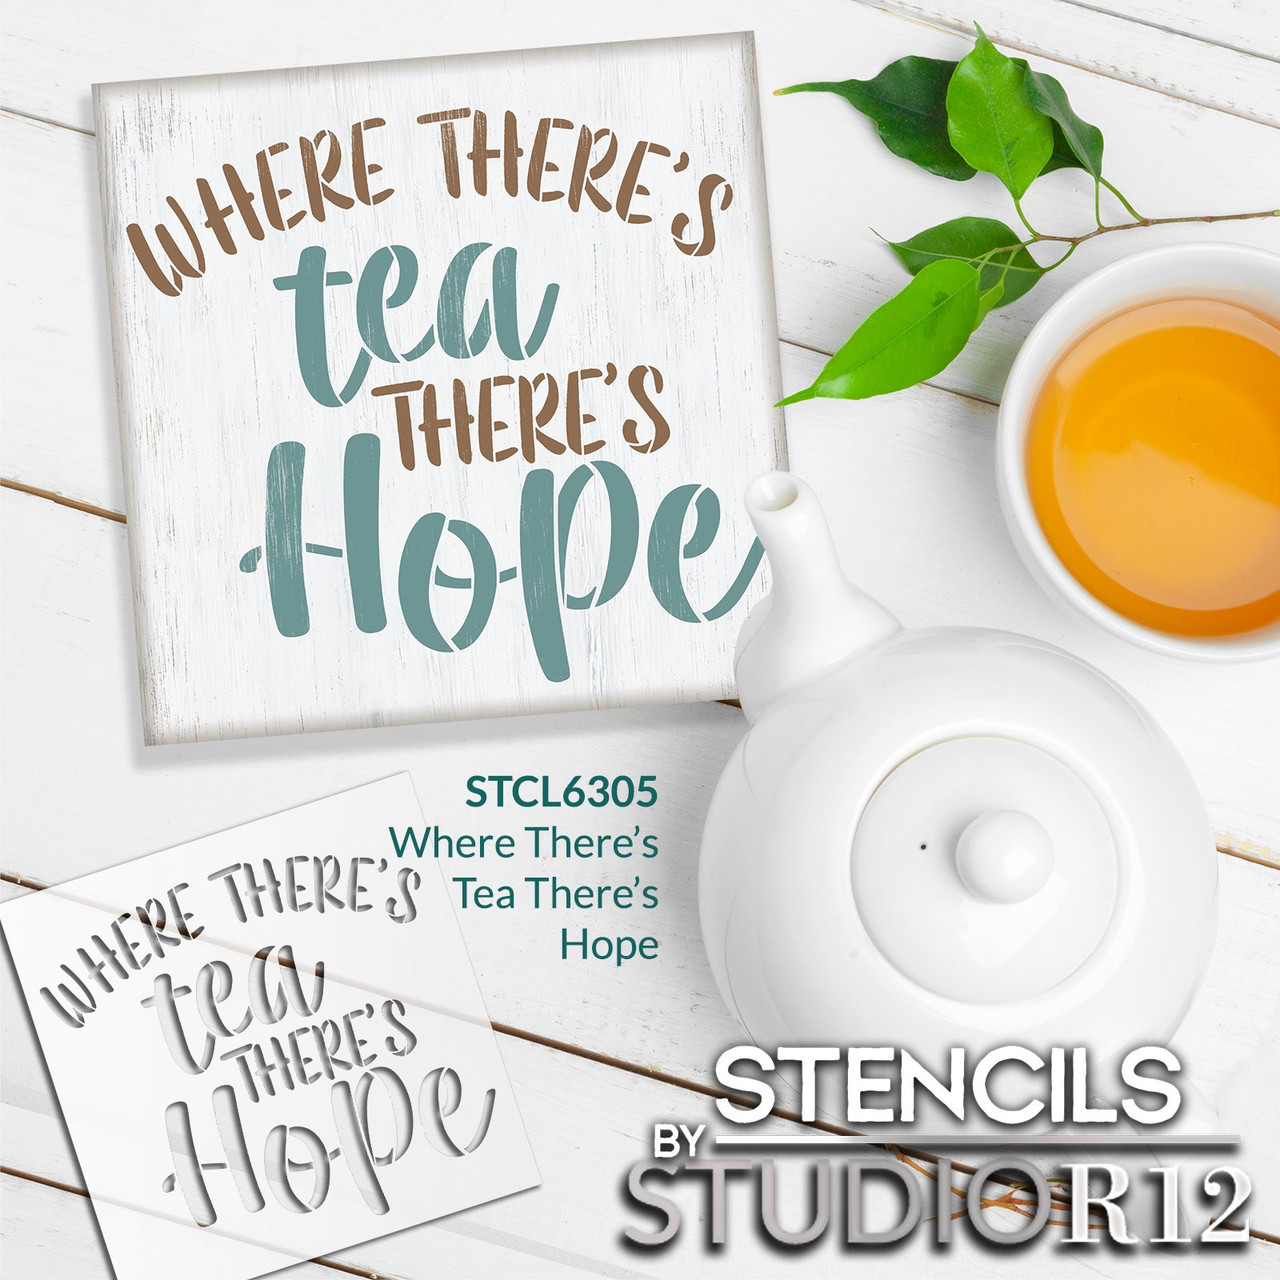 Where There's Tea There's Hope Quote Stencil by StudioR12 | Craft DIY Kitchen, Coffee Bar, and Station Decor | Paint Theme Wood Sign | Select Size